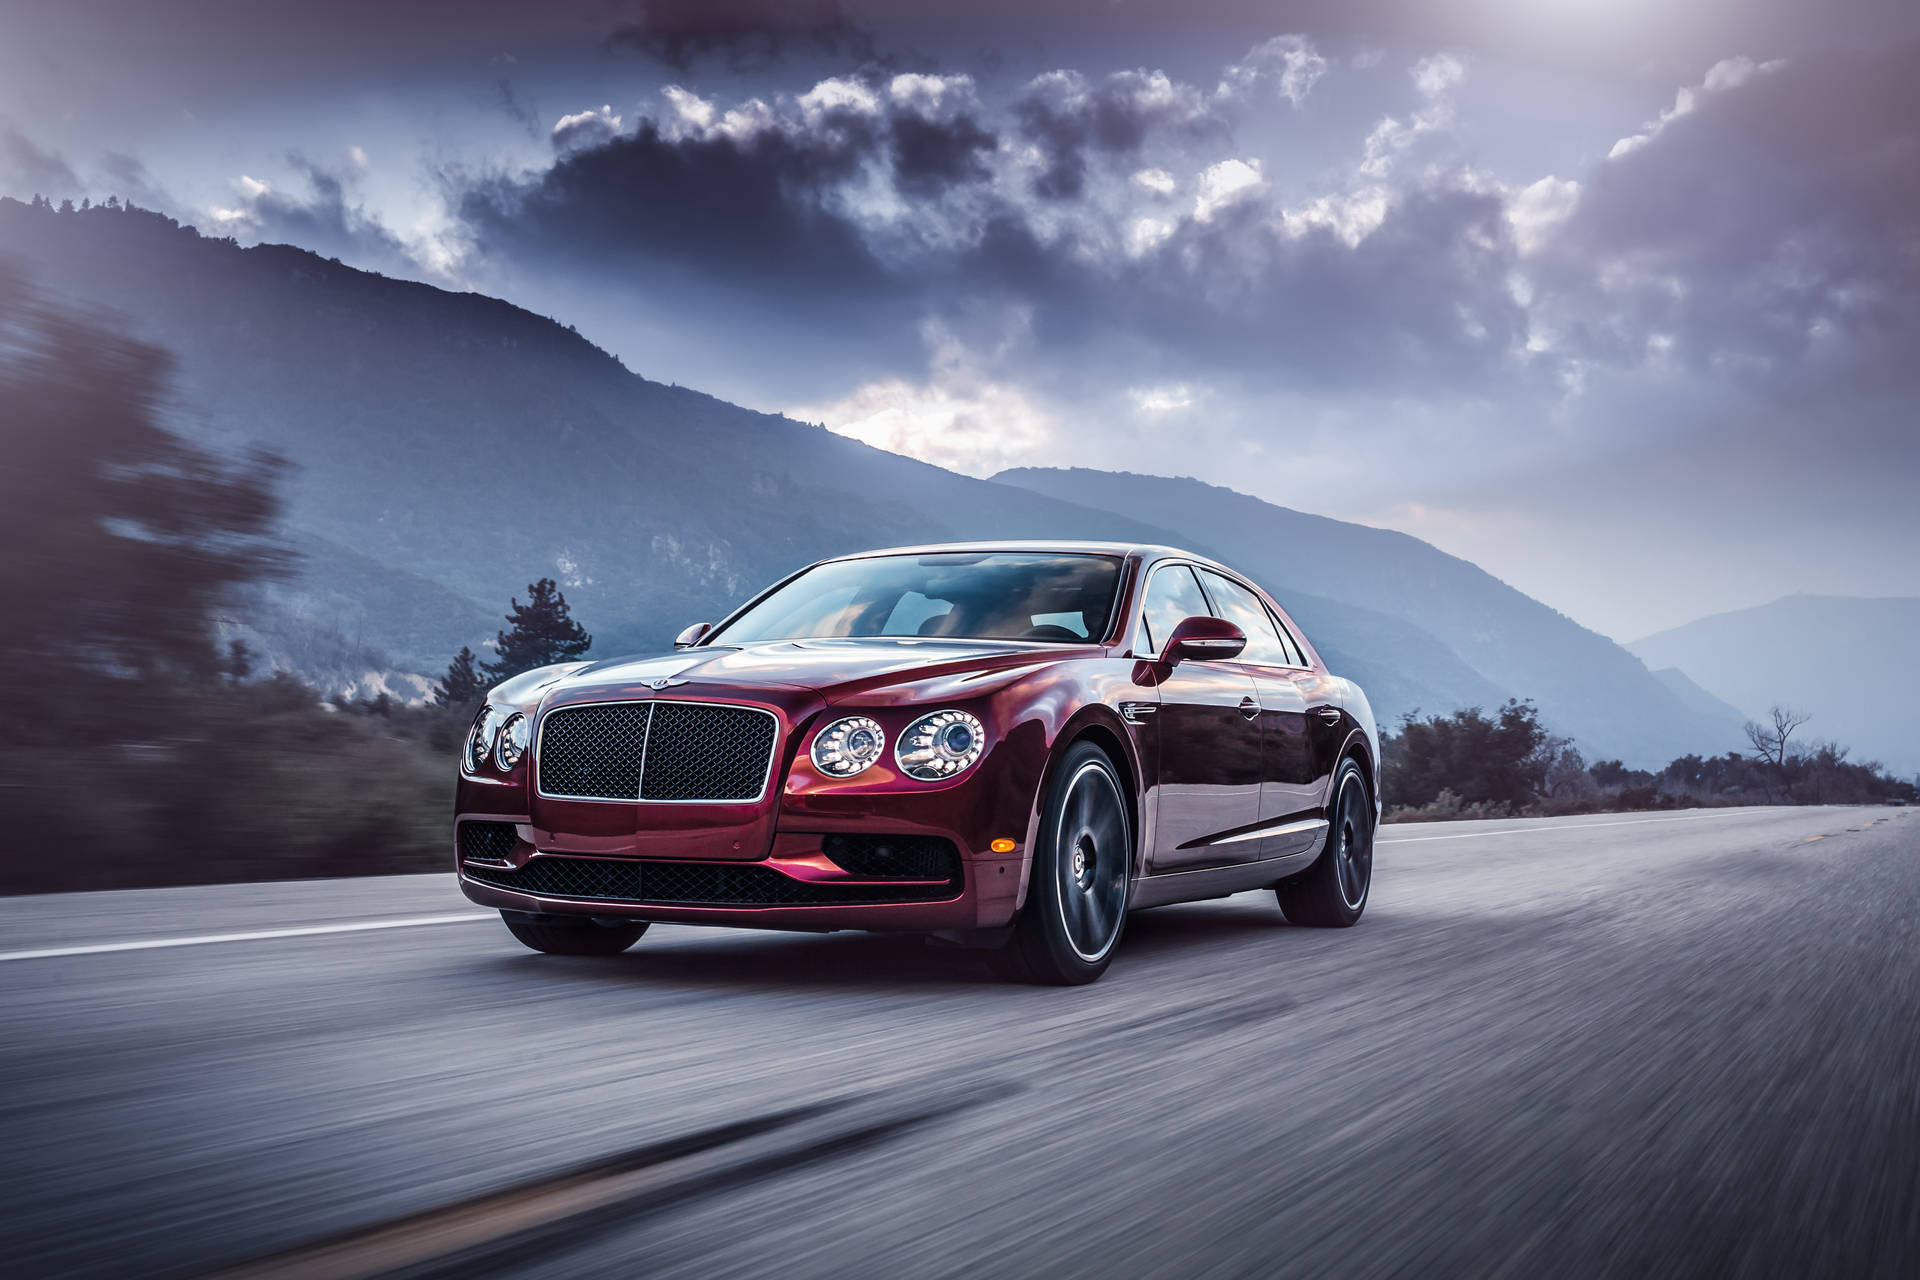 Feel the Magnificence of the Bentley Flying Spur Wallpaper